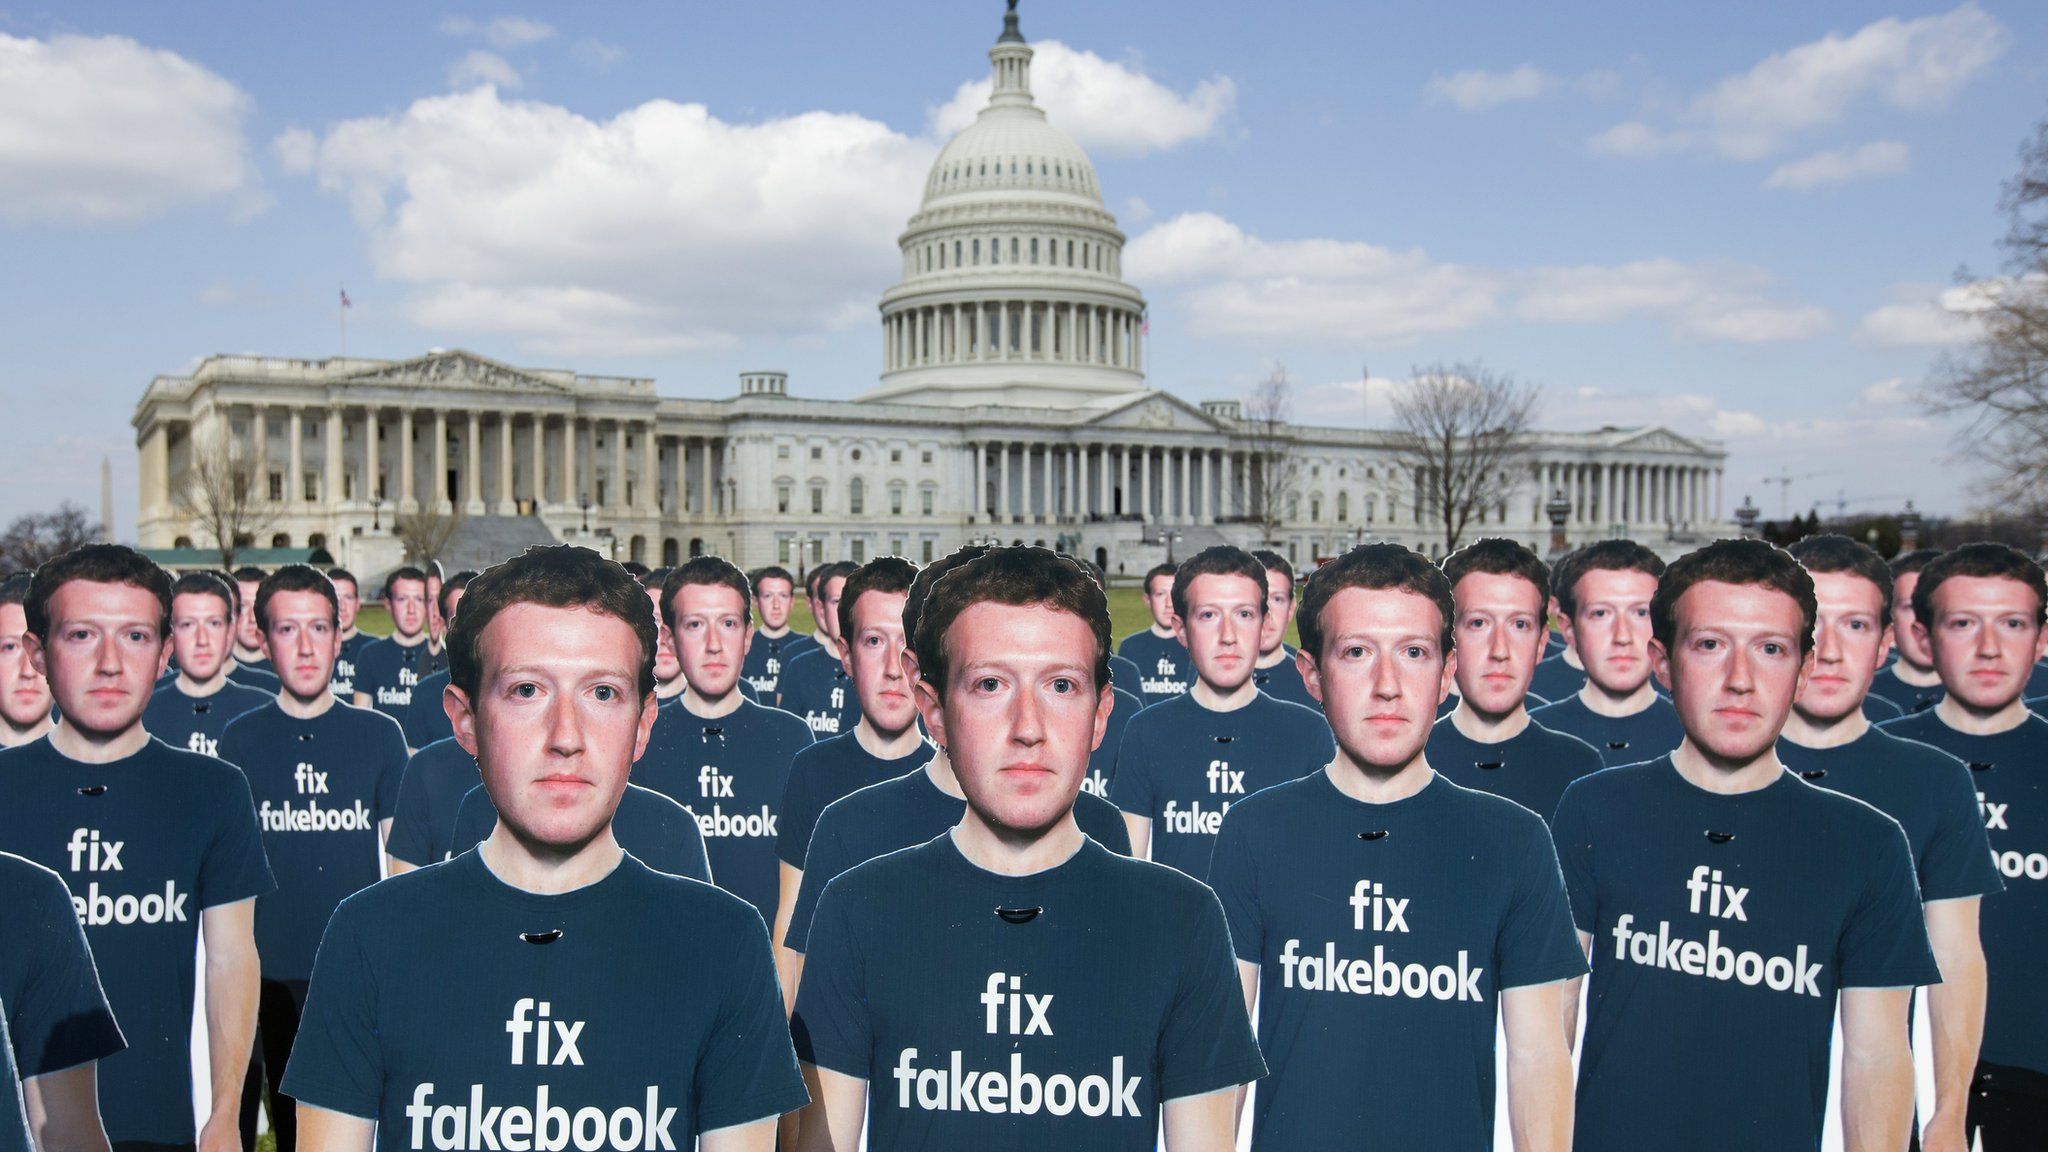 Cardboard cut-outs of Mark Zuckerberg outside the US Capitol